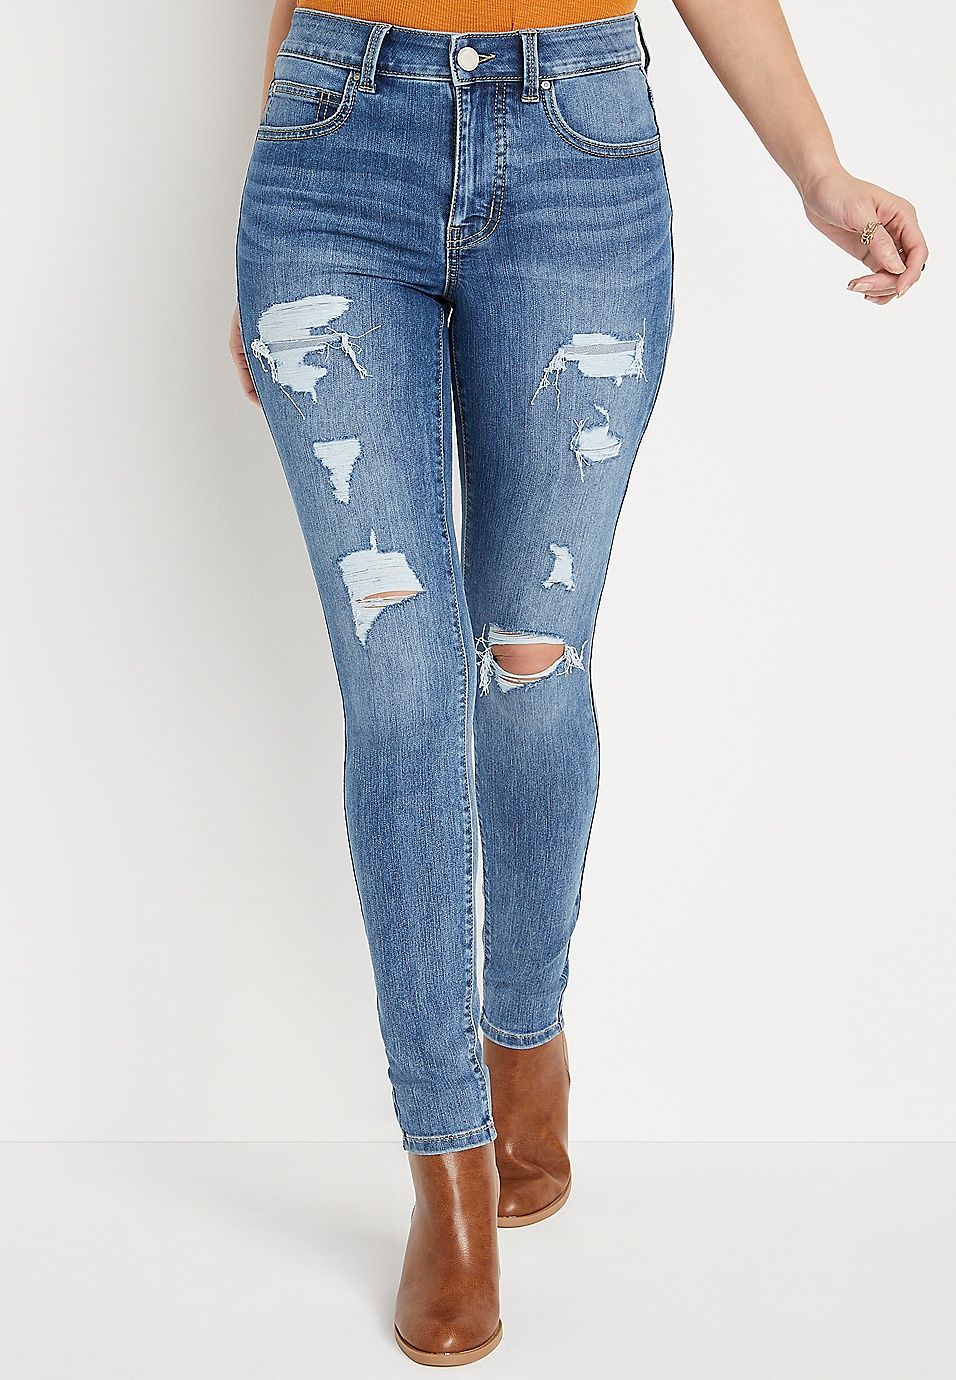 m jeans by maurices™ Everflex™ Super Skinny High Rise Ripped Jean | Maurices